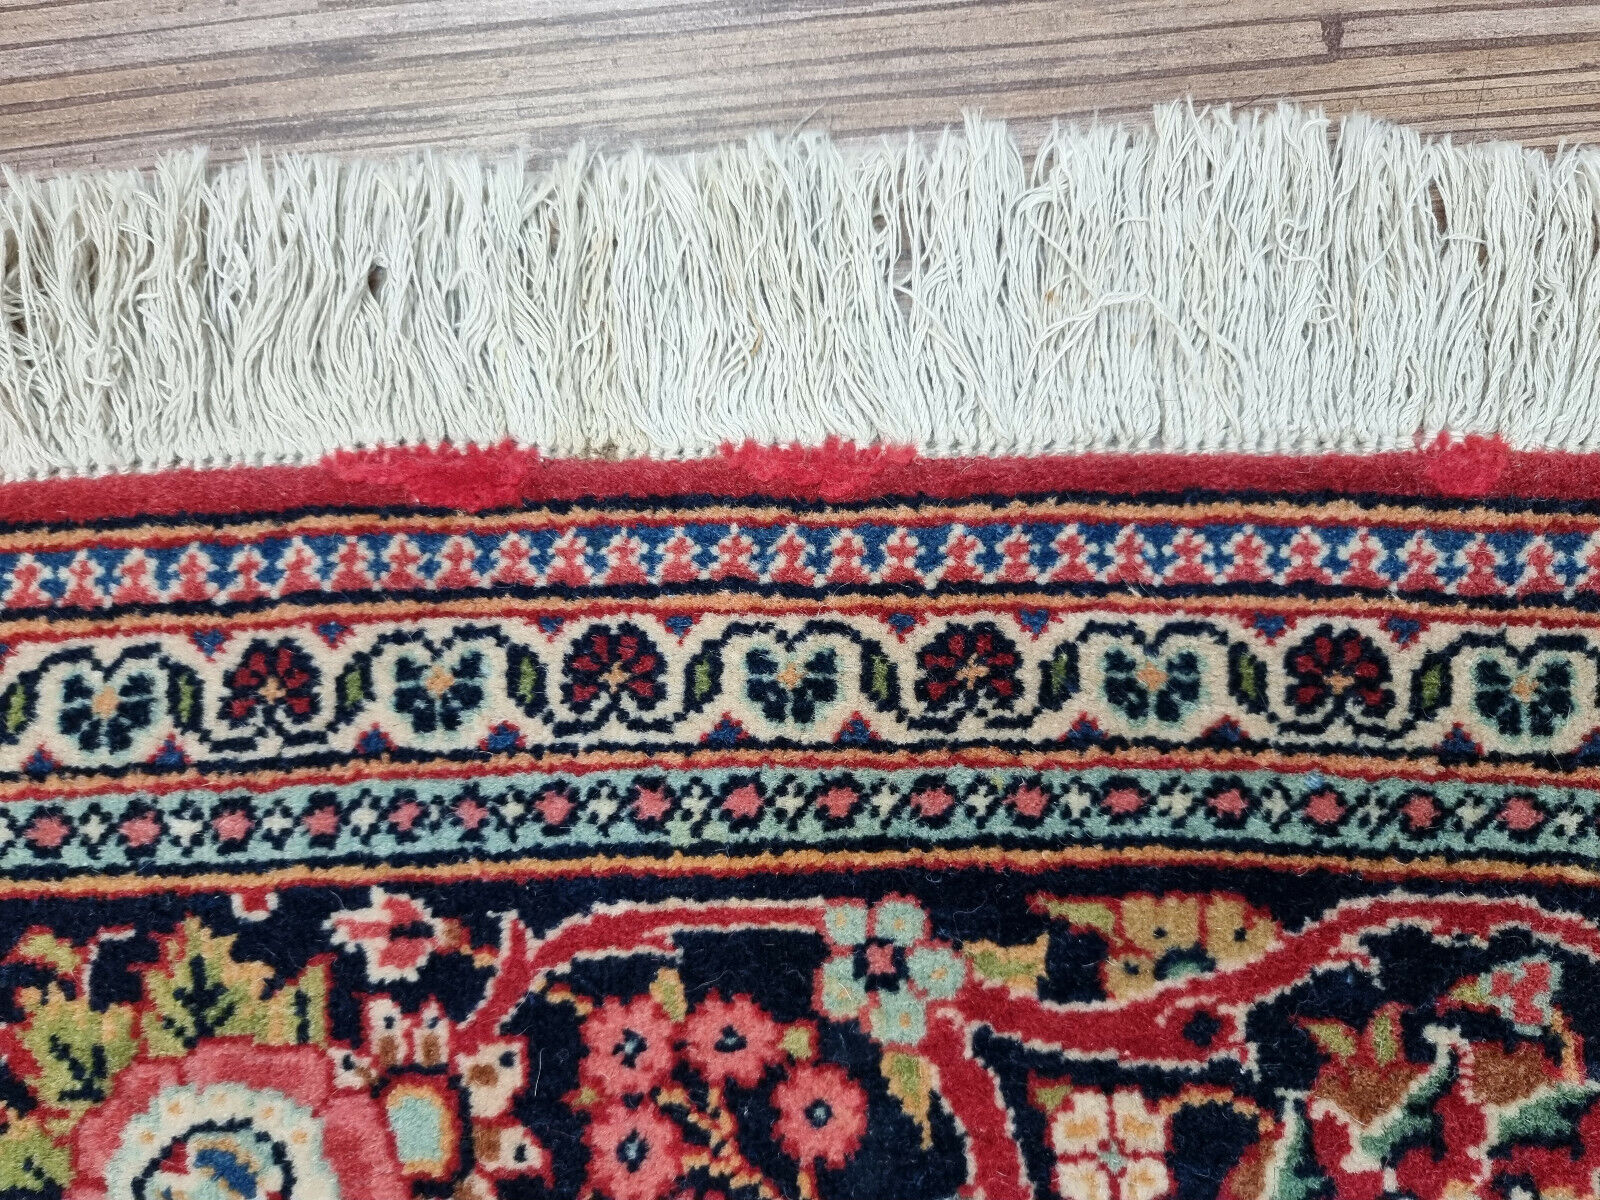 Close-up of multicolored designs on Handmade Antique Persian Kashan Rug - Detailed view showcasing the vibrant multicolored designs adorning the rug.